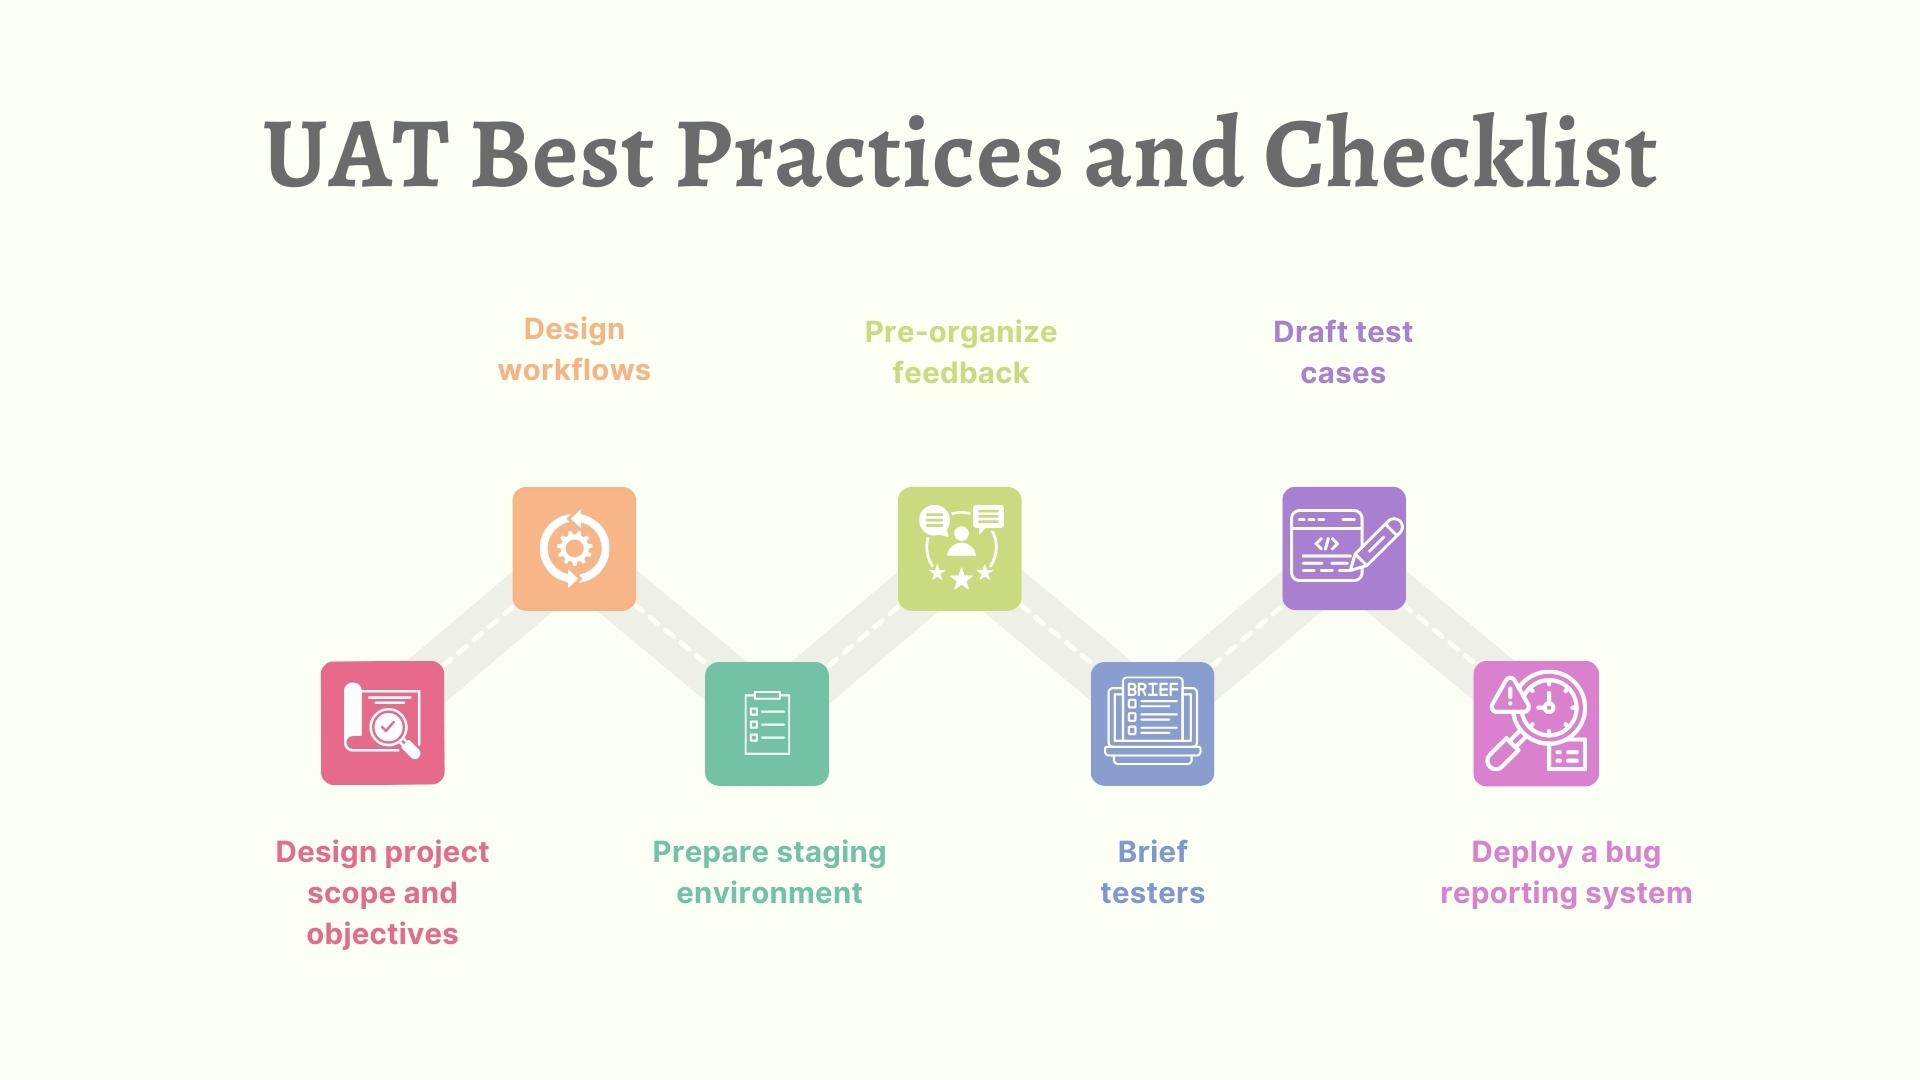 UAT testing best practices and checklist